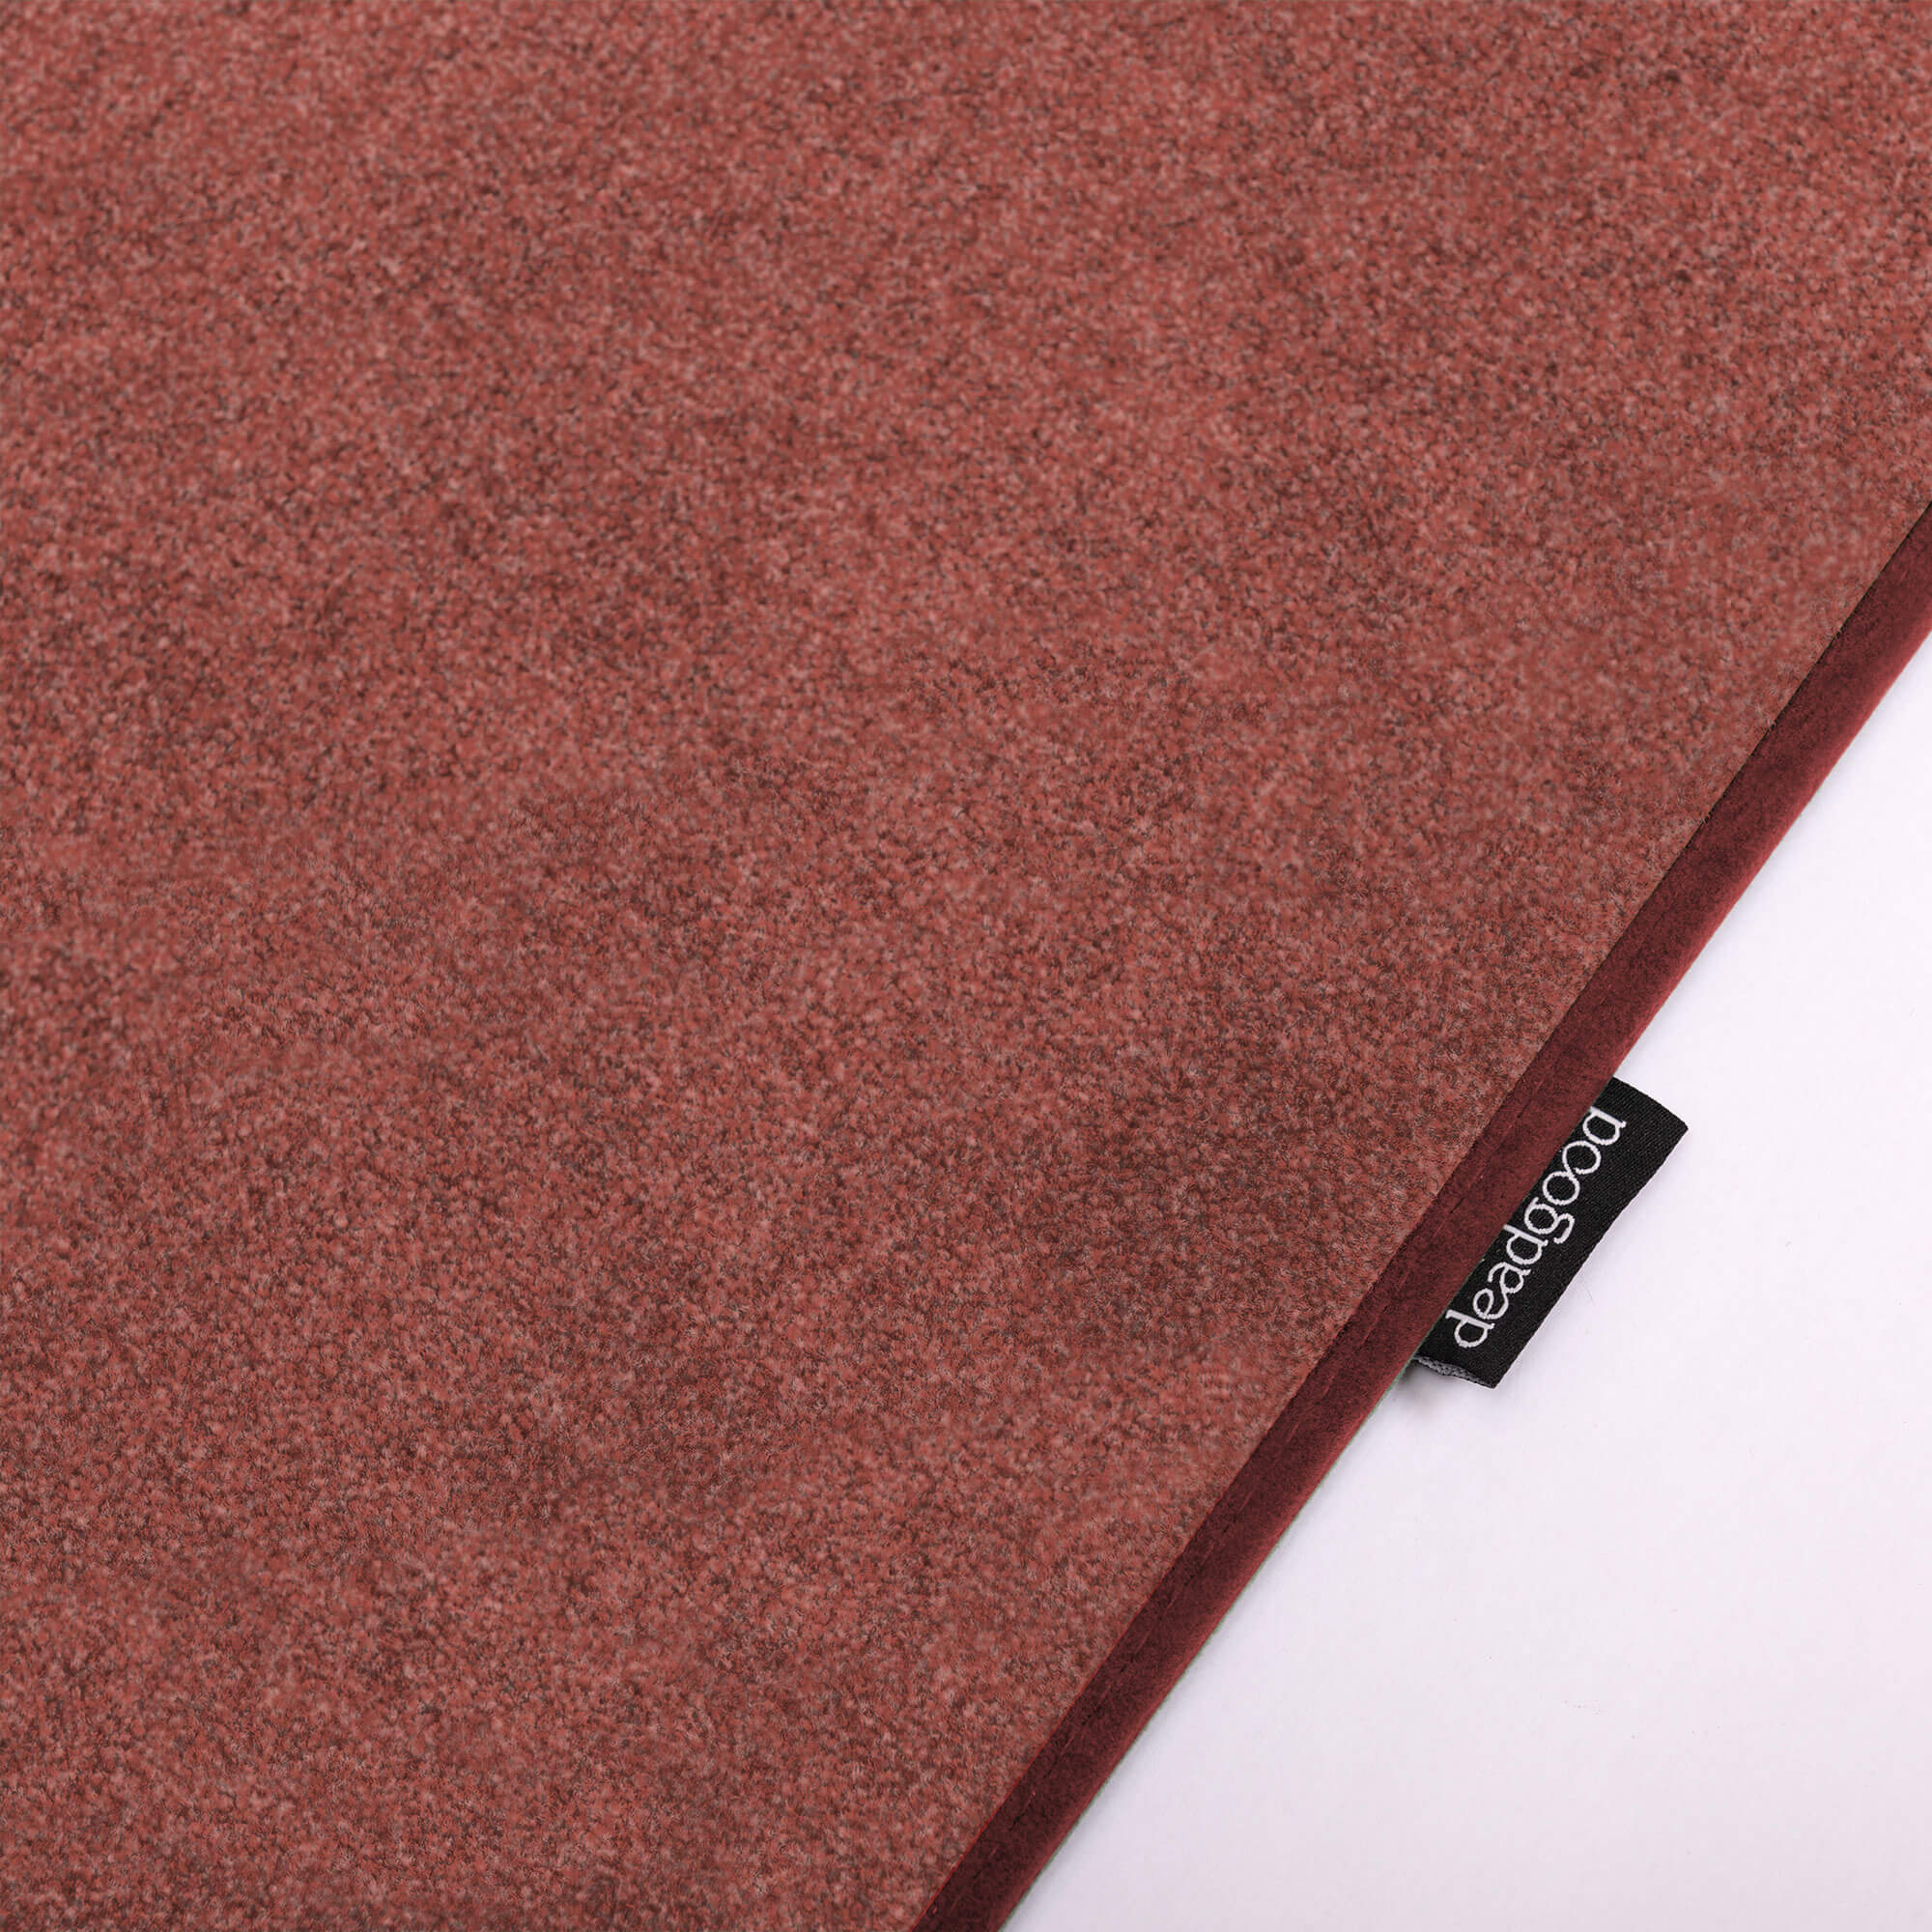 Detail of a subtle and plain textural rug for corporate boardrooms